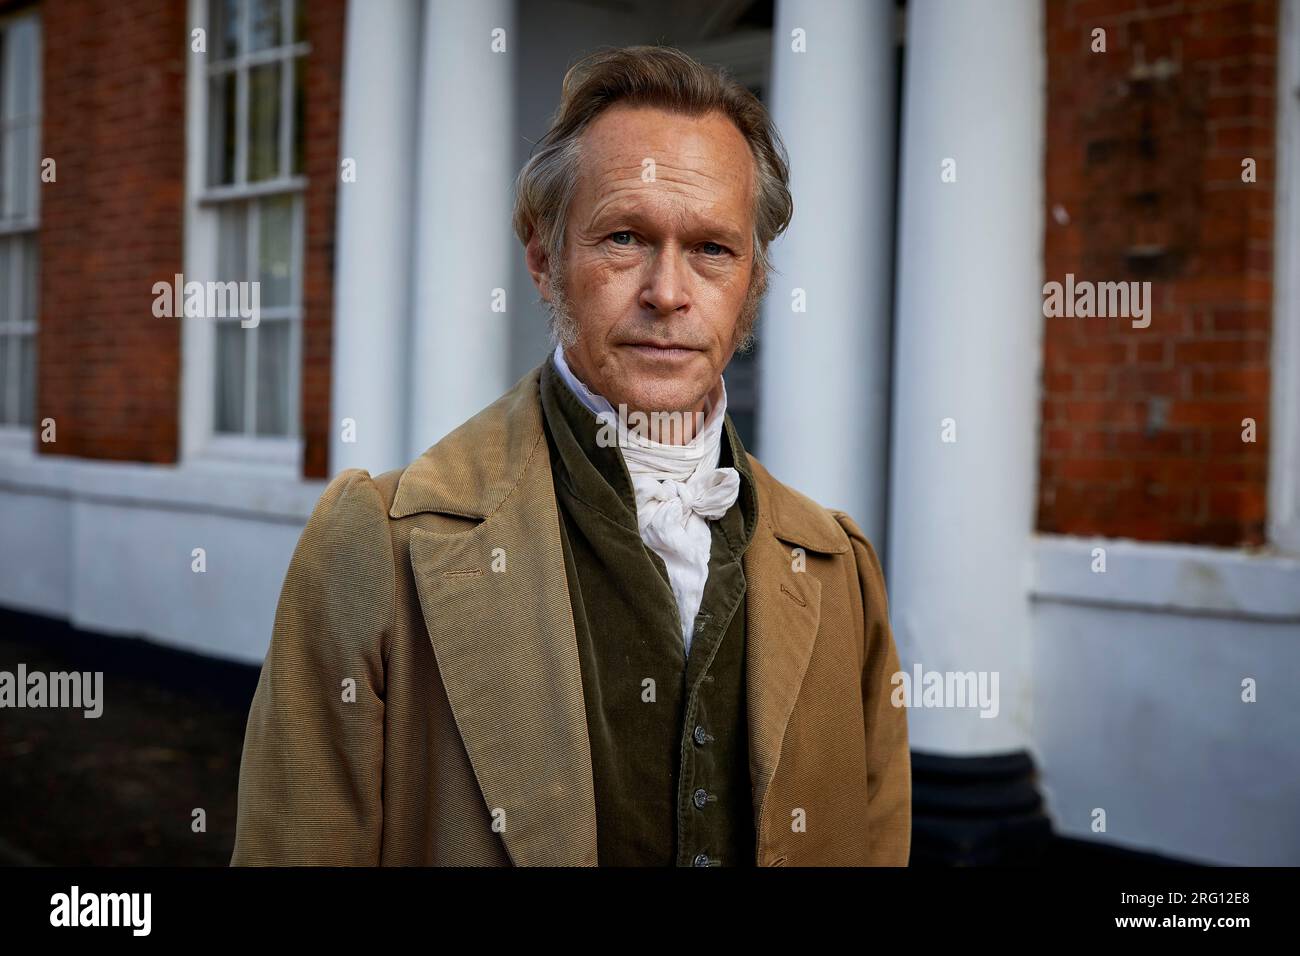 STEVEN MACKINTOSH in THE CONFESSIONS OF FRANNIE LANGTON (2022), directed by ANDREA HARKIN. Credit: All3Media / Album Stock Photo